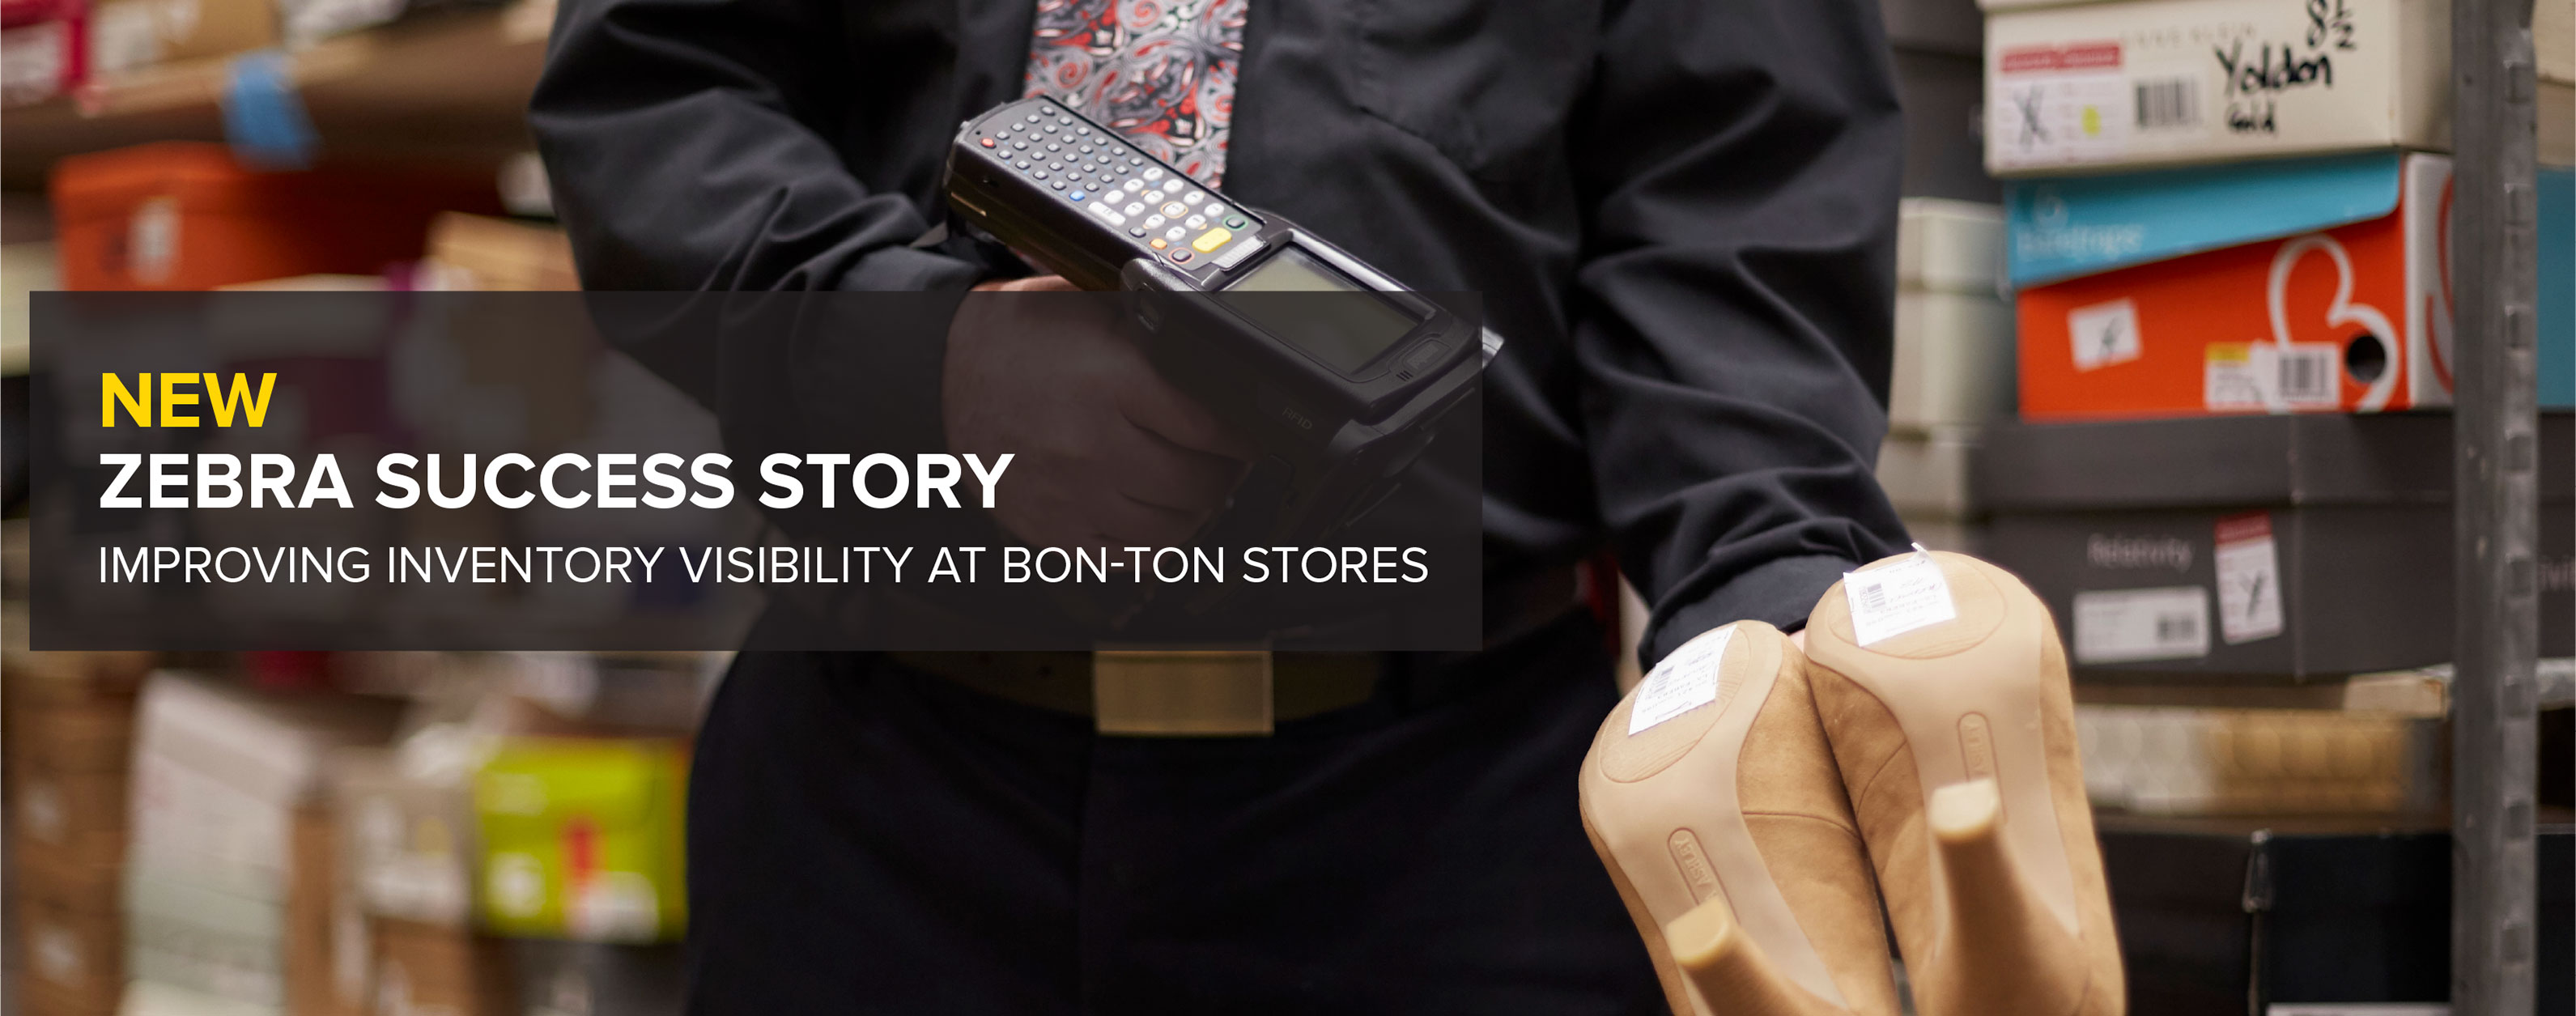 New Zebra Success Story – Improving Inventory Visibility at Bon-Ton Stores